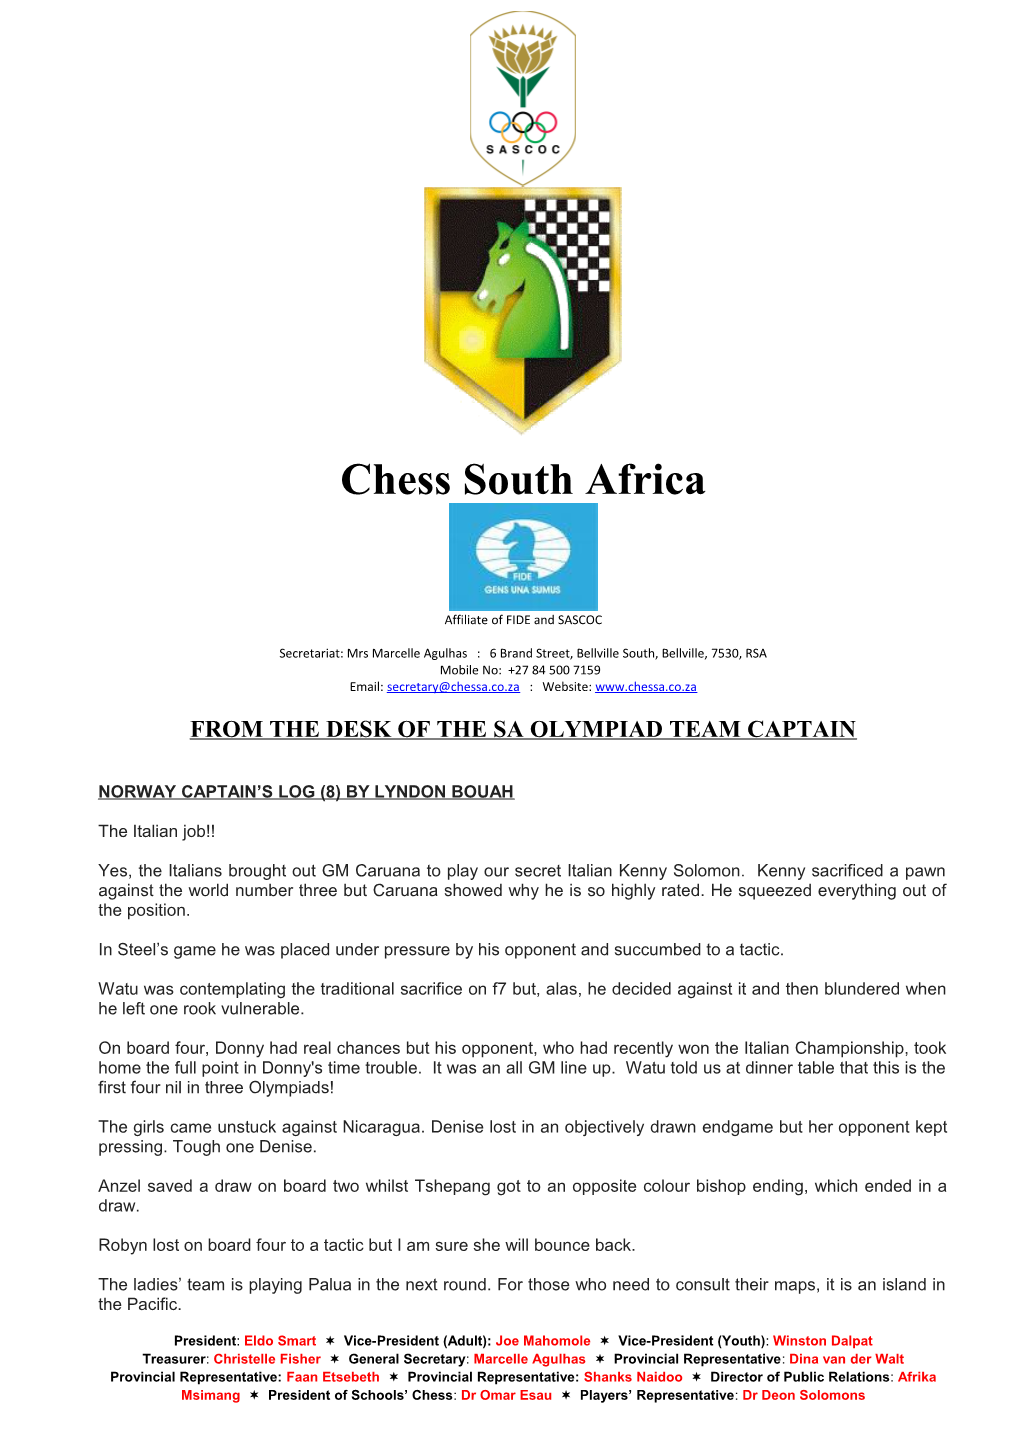 From the Desk of the Sa Olympiad Team Captain